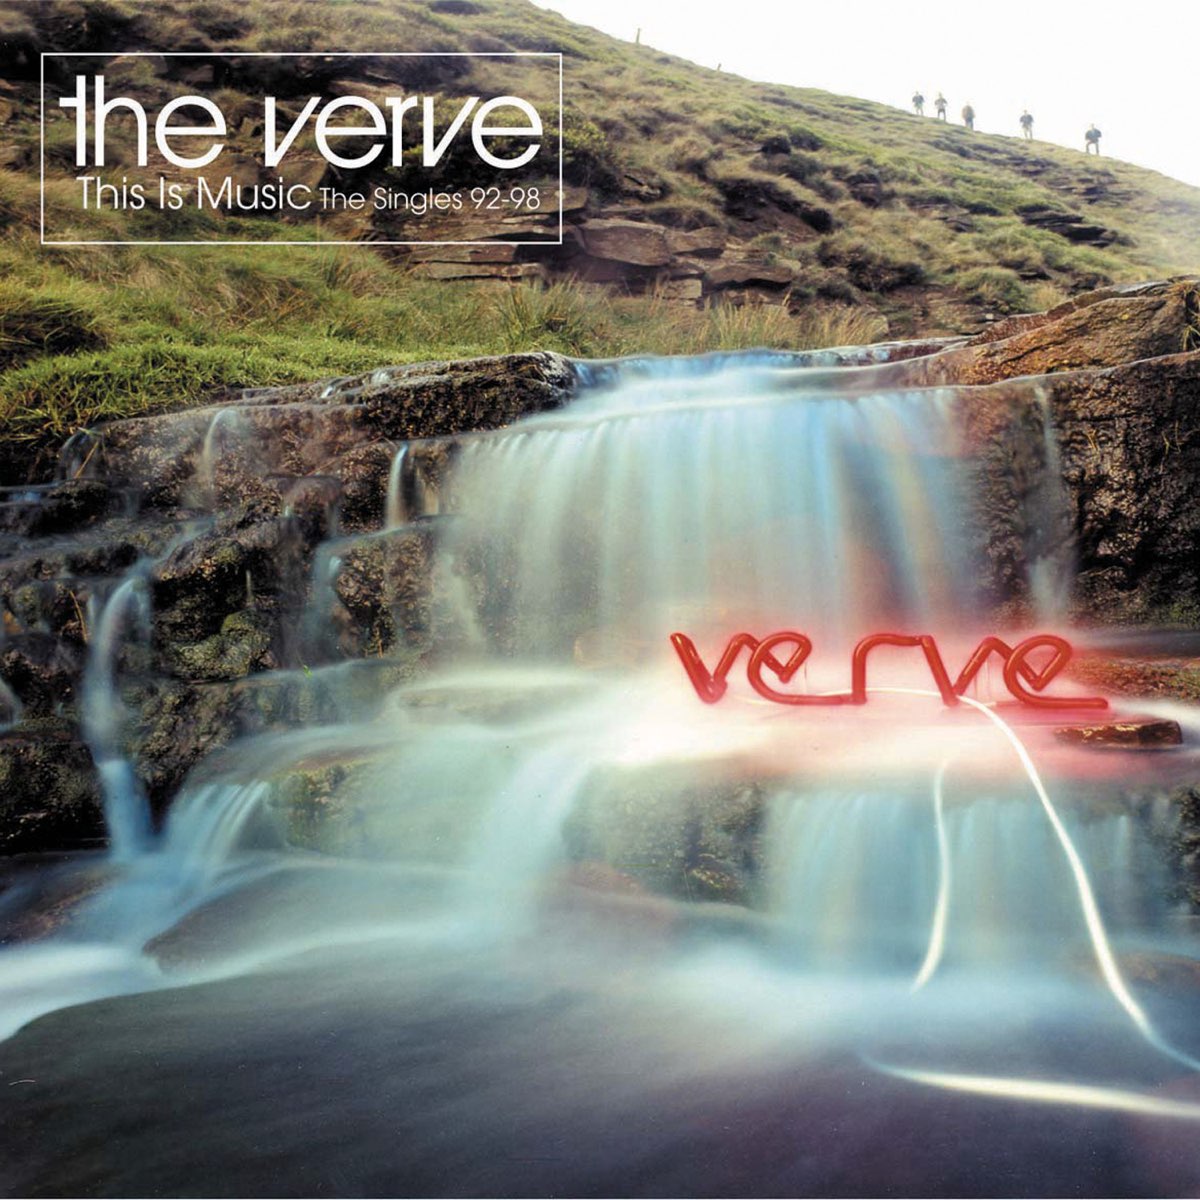 This Is Music: The Singles 92-98 - Album by The Verve - Apple Music